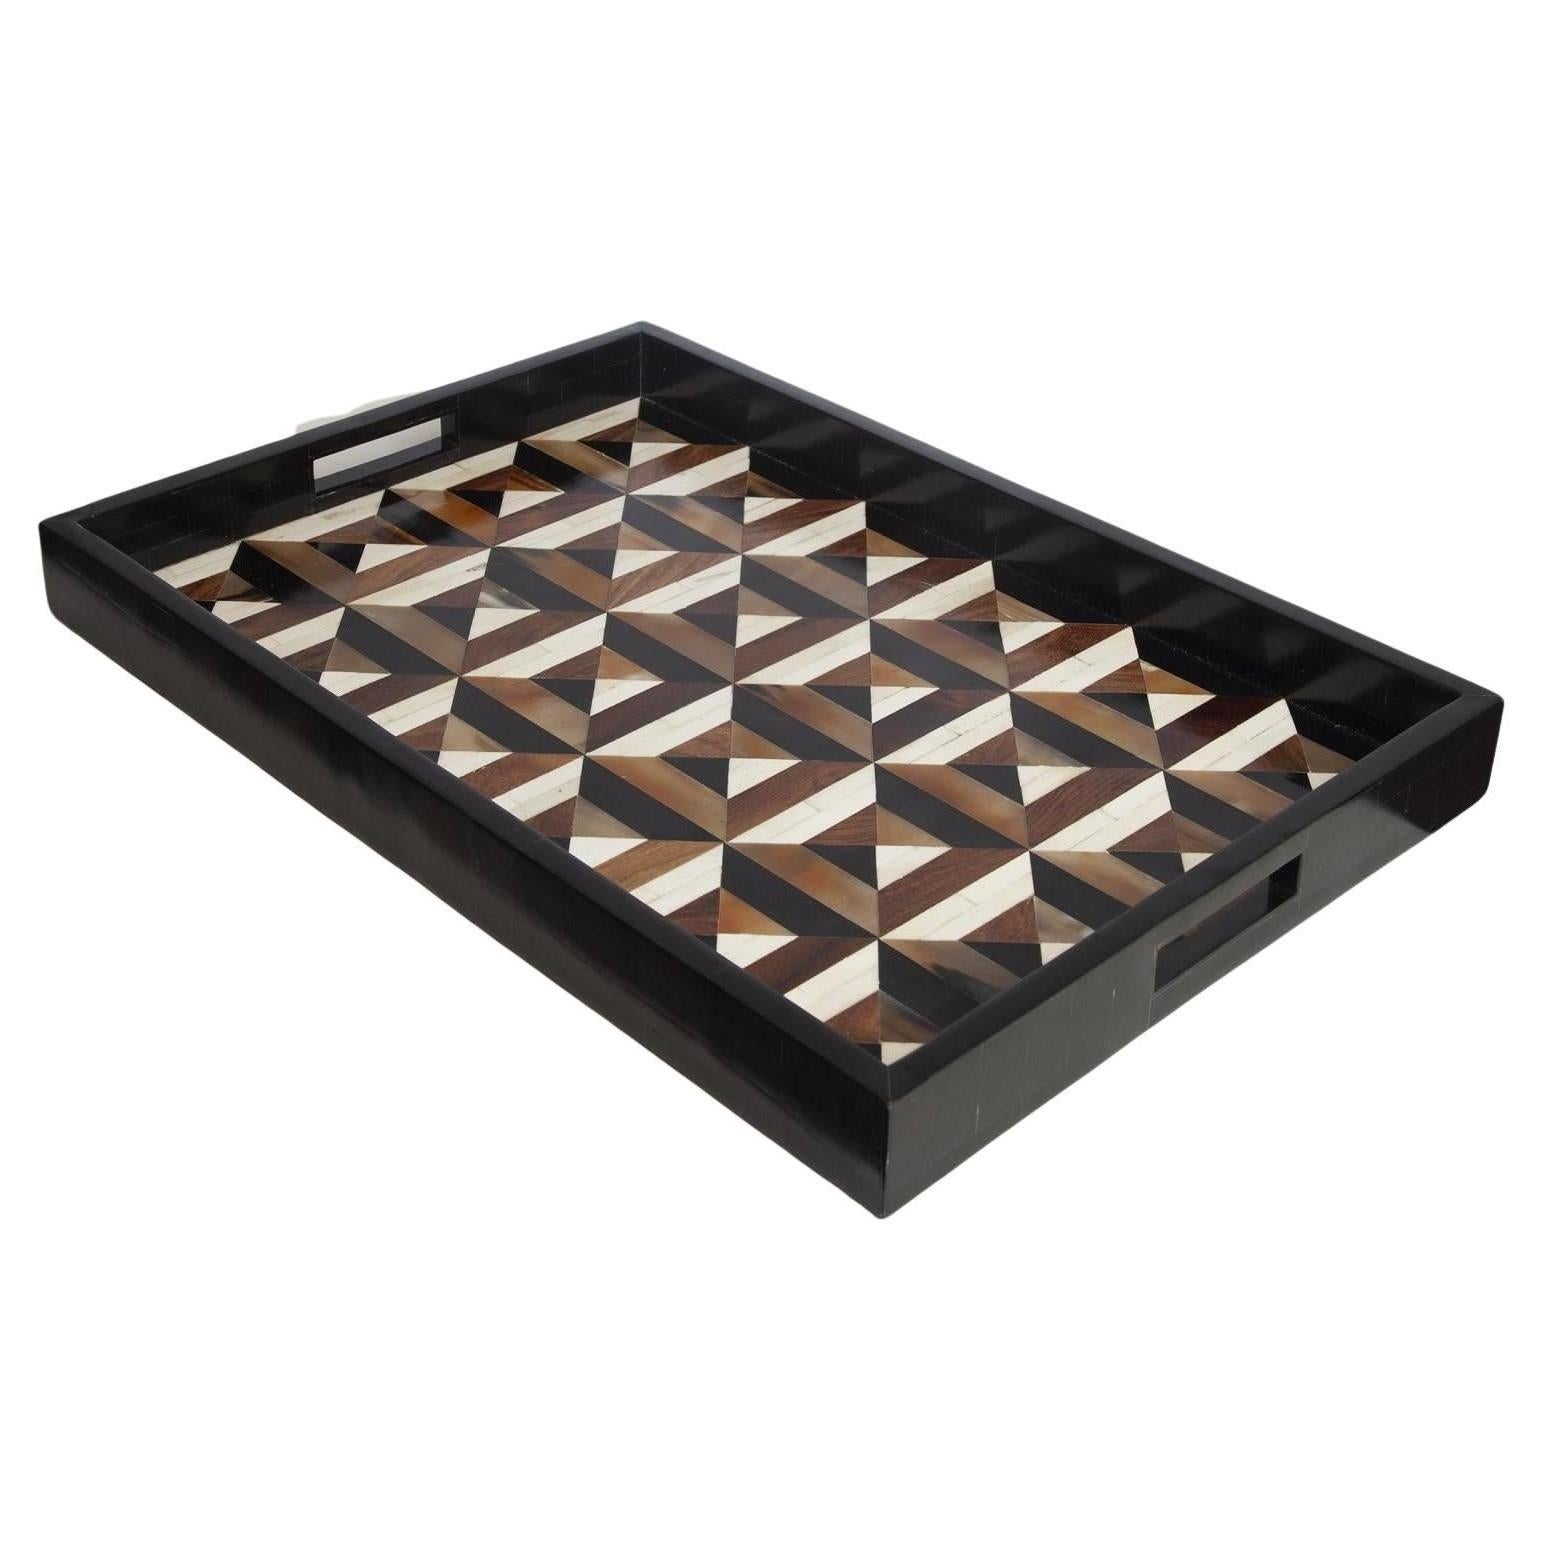 Large Marquette Tray large fitted with bone, horn resin, and teak inlays
Optical pattern formed with hand-appliqued detailing
Sourced by Martyn Lawrence Bullard 